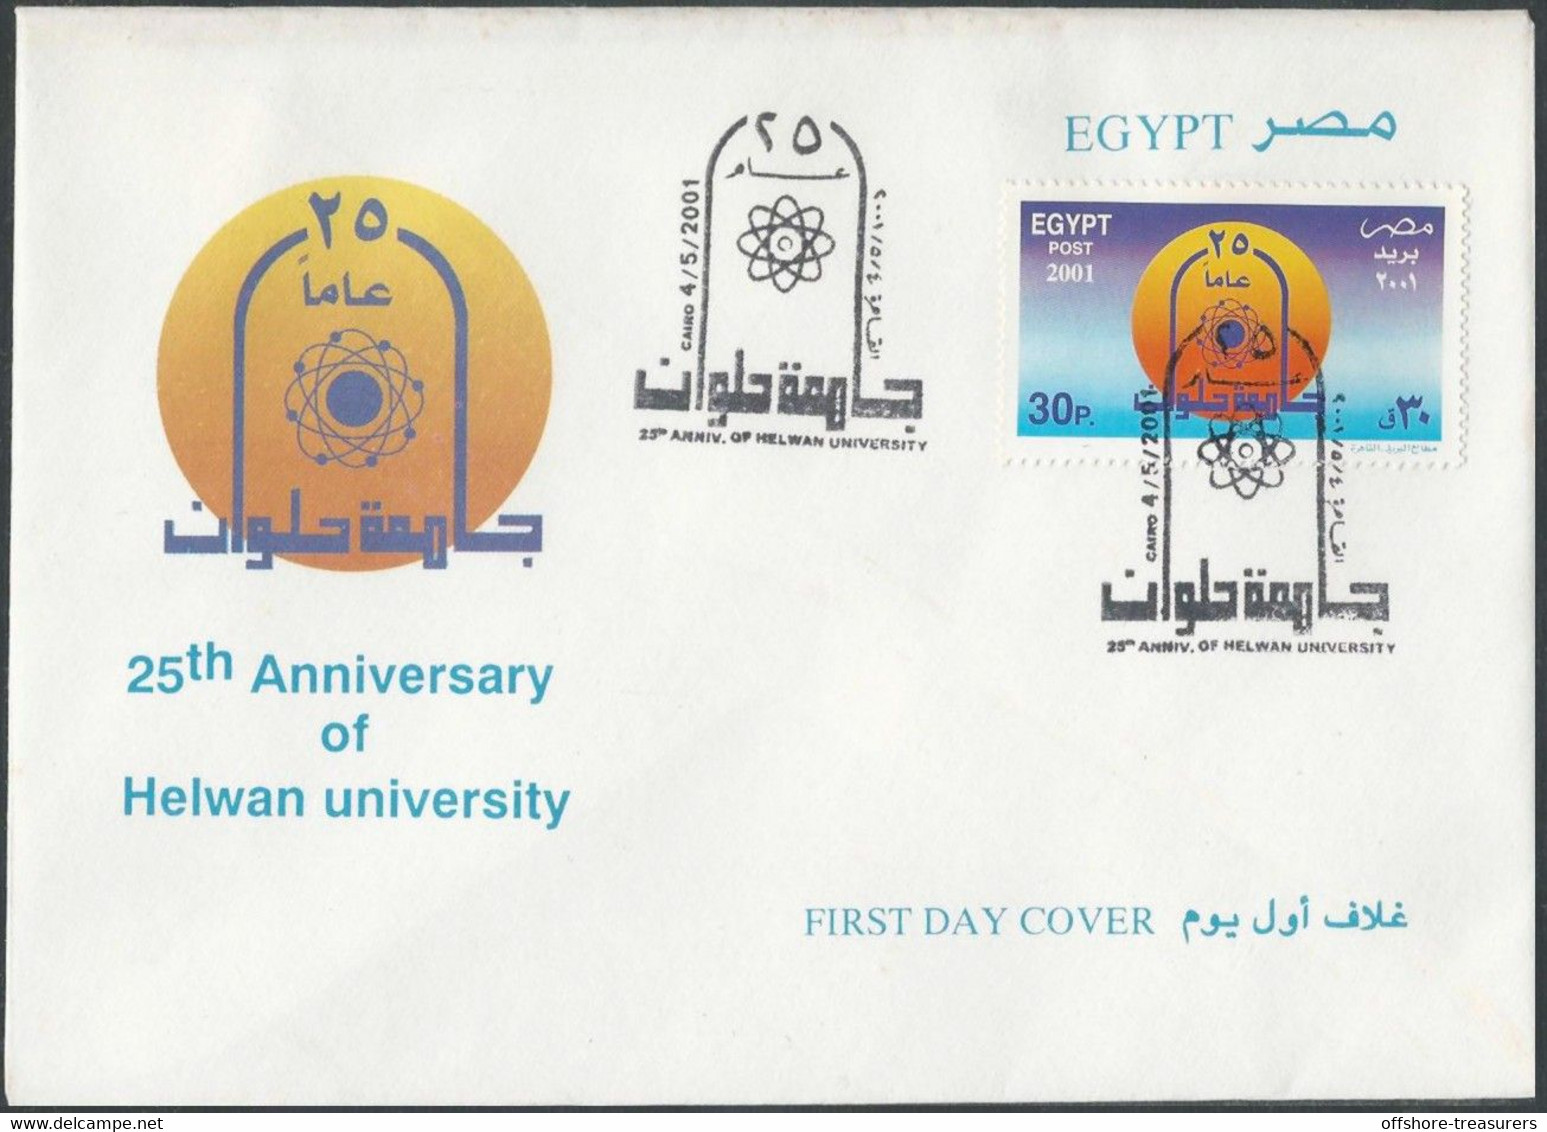 Egypt FDC 1976 - 2001 Helwan University 25th Anniversary - Silver Jubilee - Covers & Documents